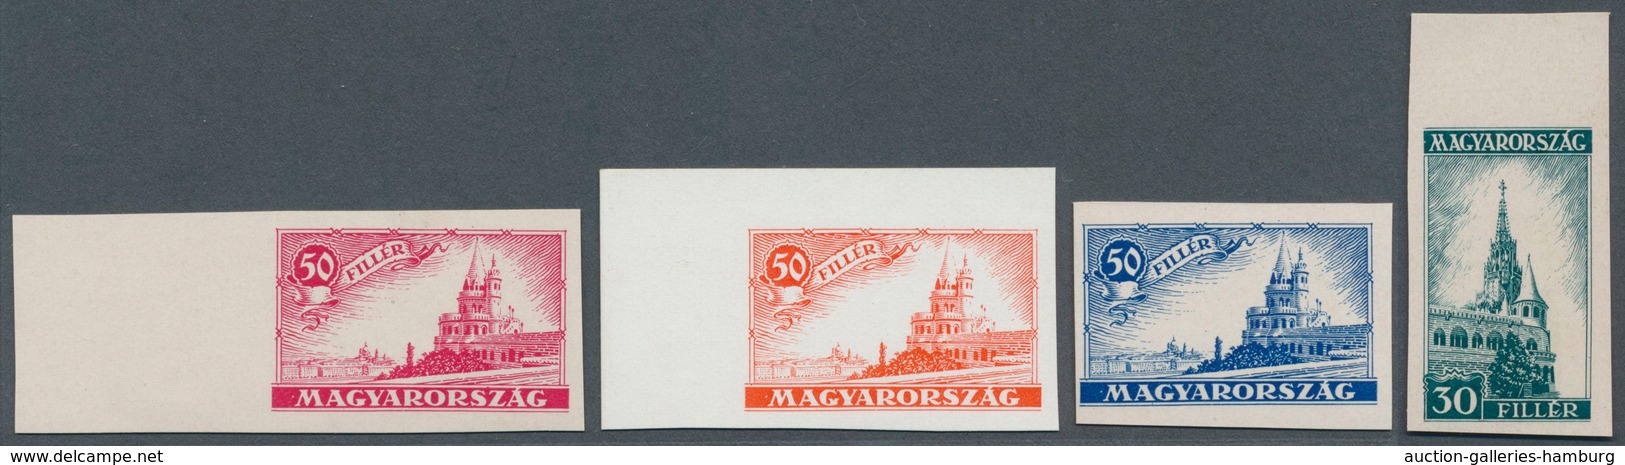 Ungarn: 1926: "30 FILLER MAGYARORSZAG" Or "50 FILLER" Showing The Matthias Cathedral ECKERLIN ESSAYS - Covers & Documents